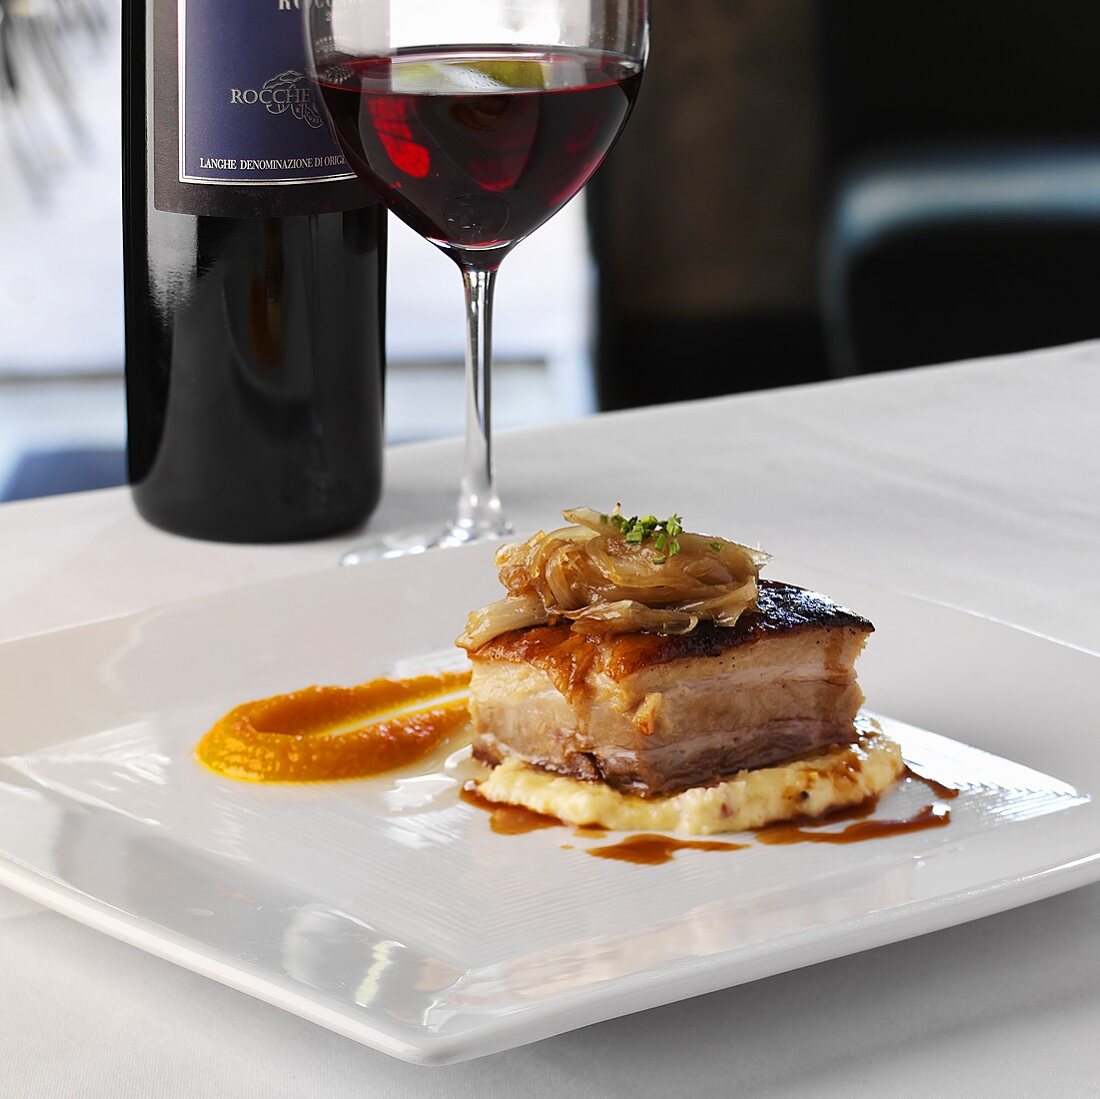 Beer-braised pork belly on polenta with caramelised shallots and carrot coulis